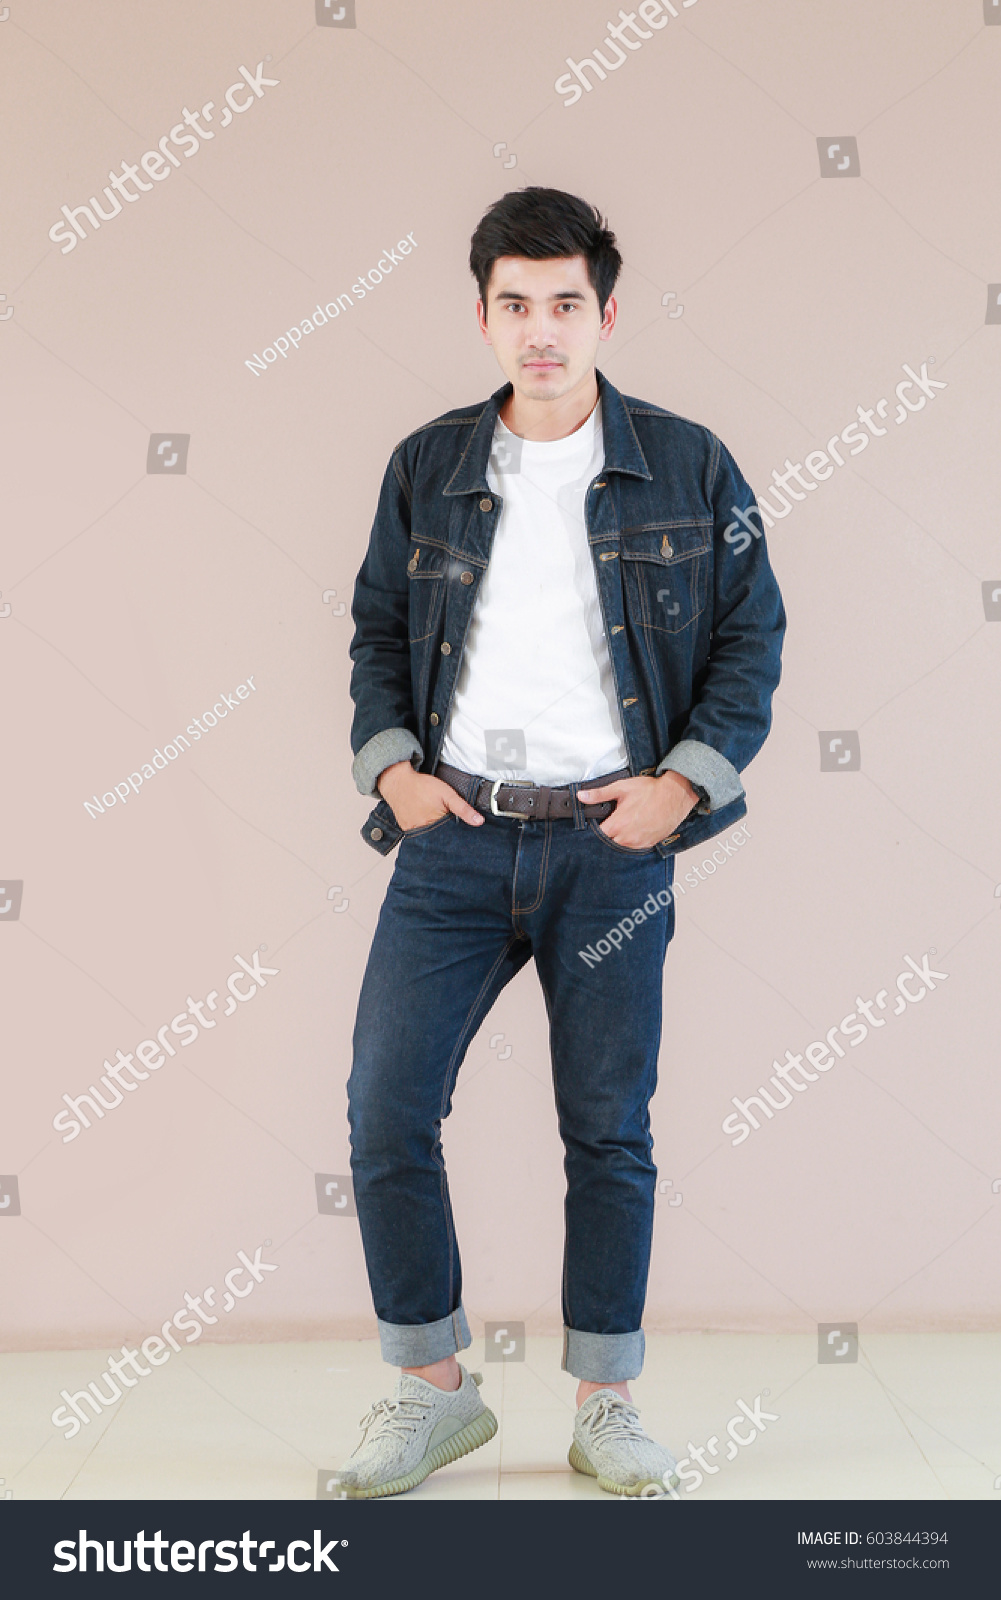 Asian Man Casual Outfits Standing Jeans Stock Photo 603844394 | Shutterstock